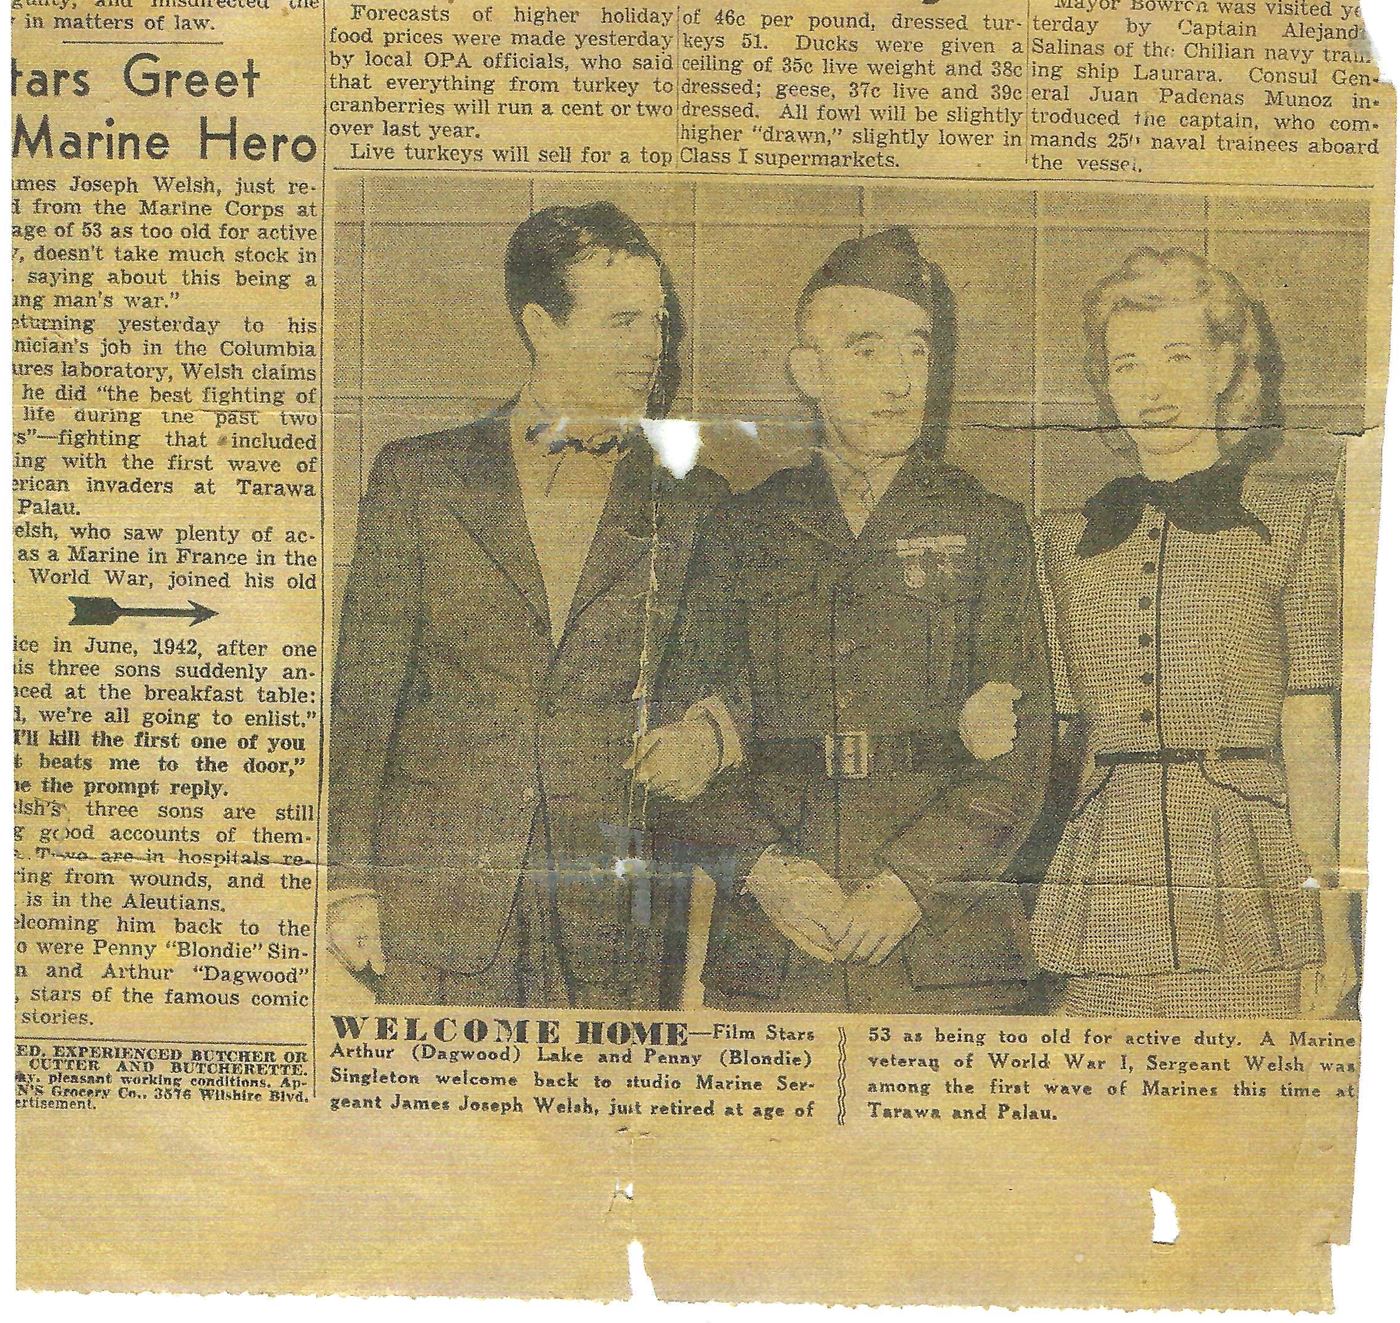 James Welsh, Senior returns from active duty, WWII and is welcomed home by Dagwood and Blondie.